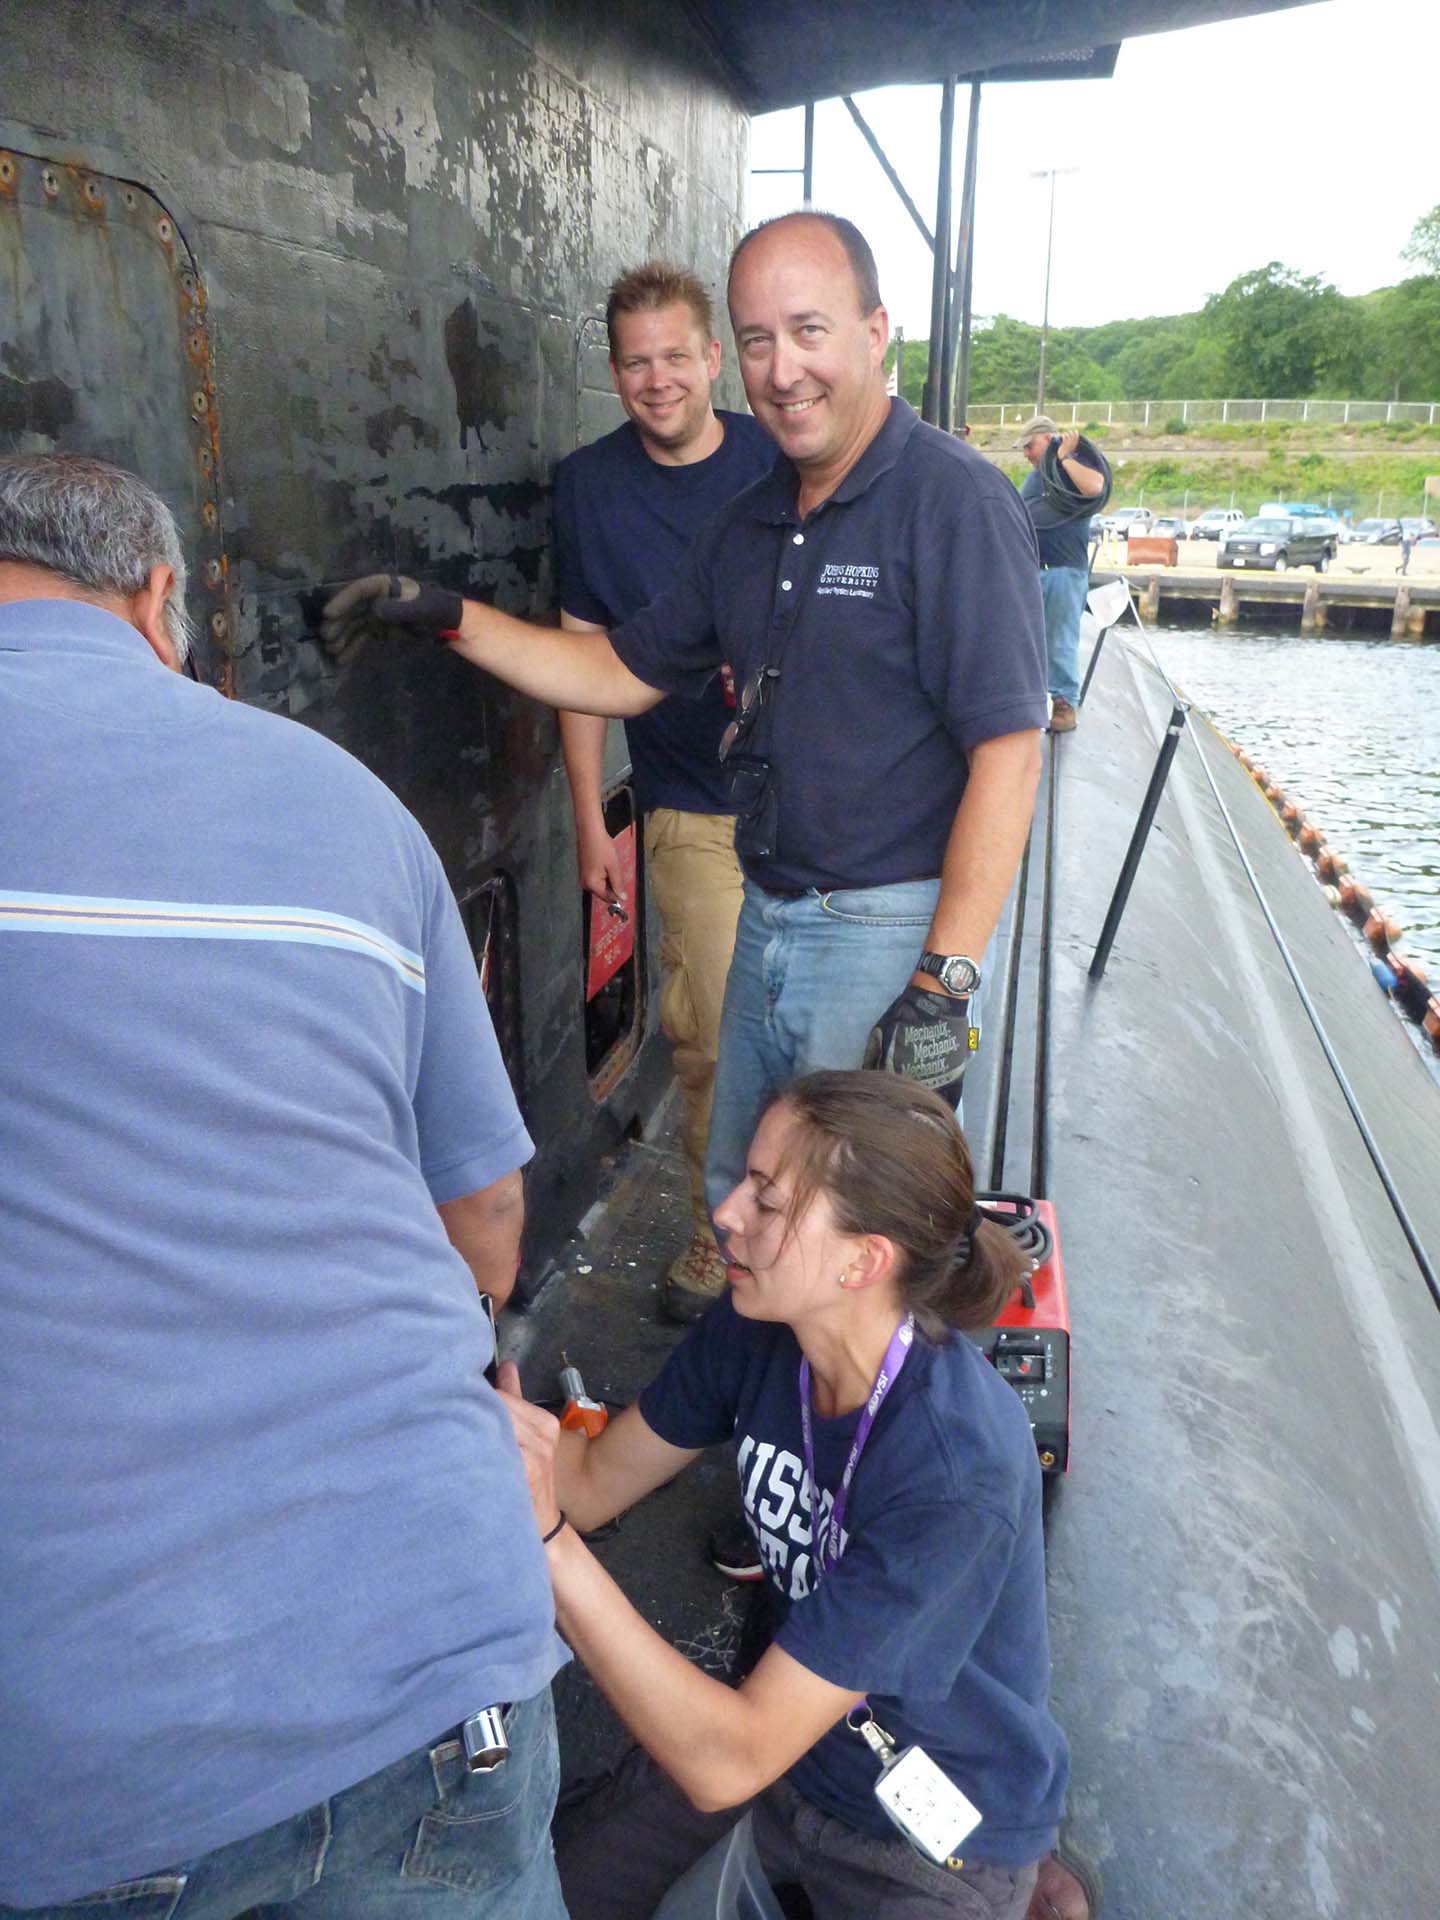 Members of the Pelagos team from the U.S. Navy and Johns Hopkins APL